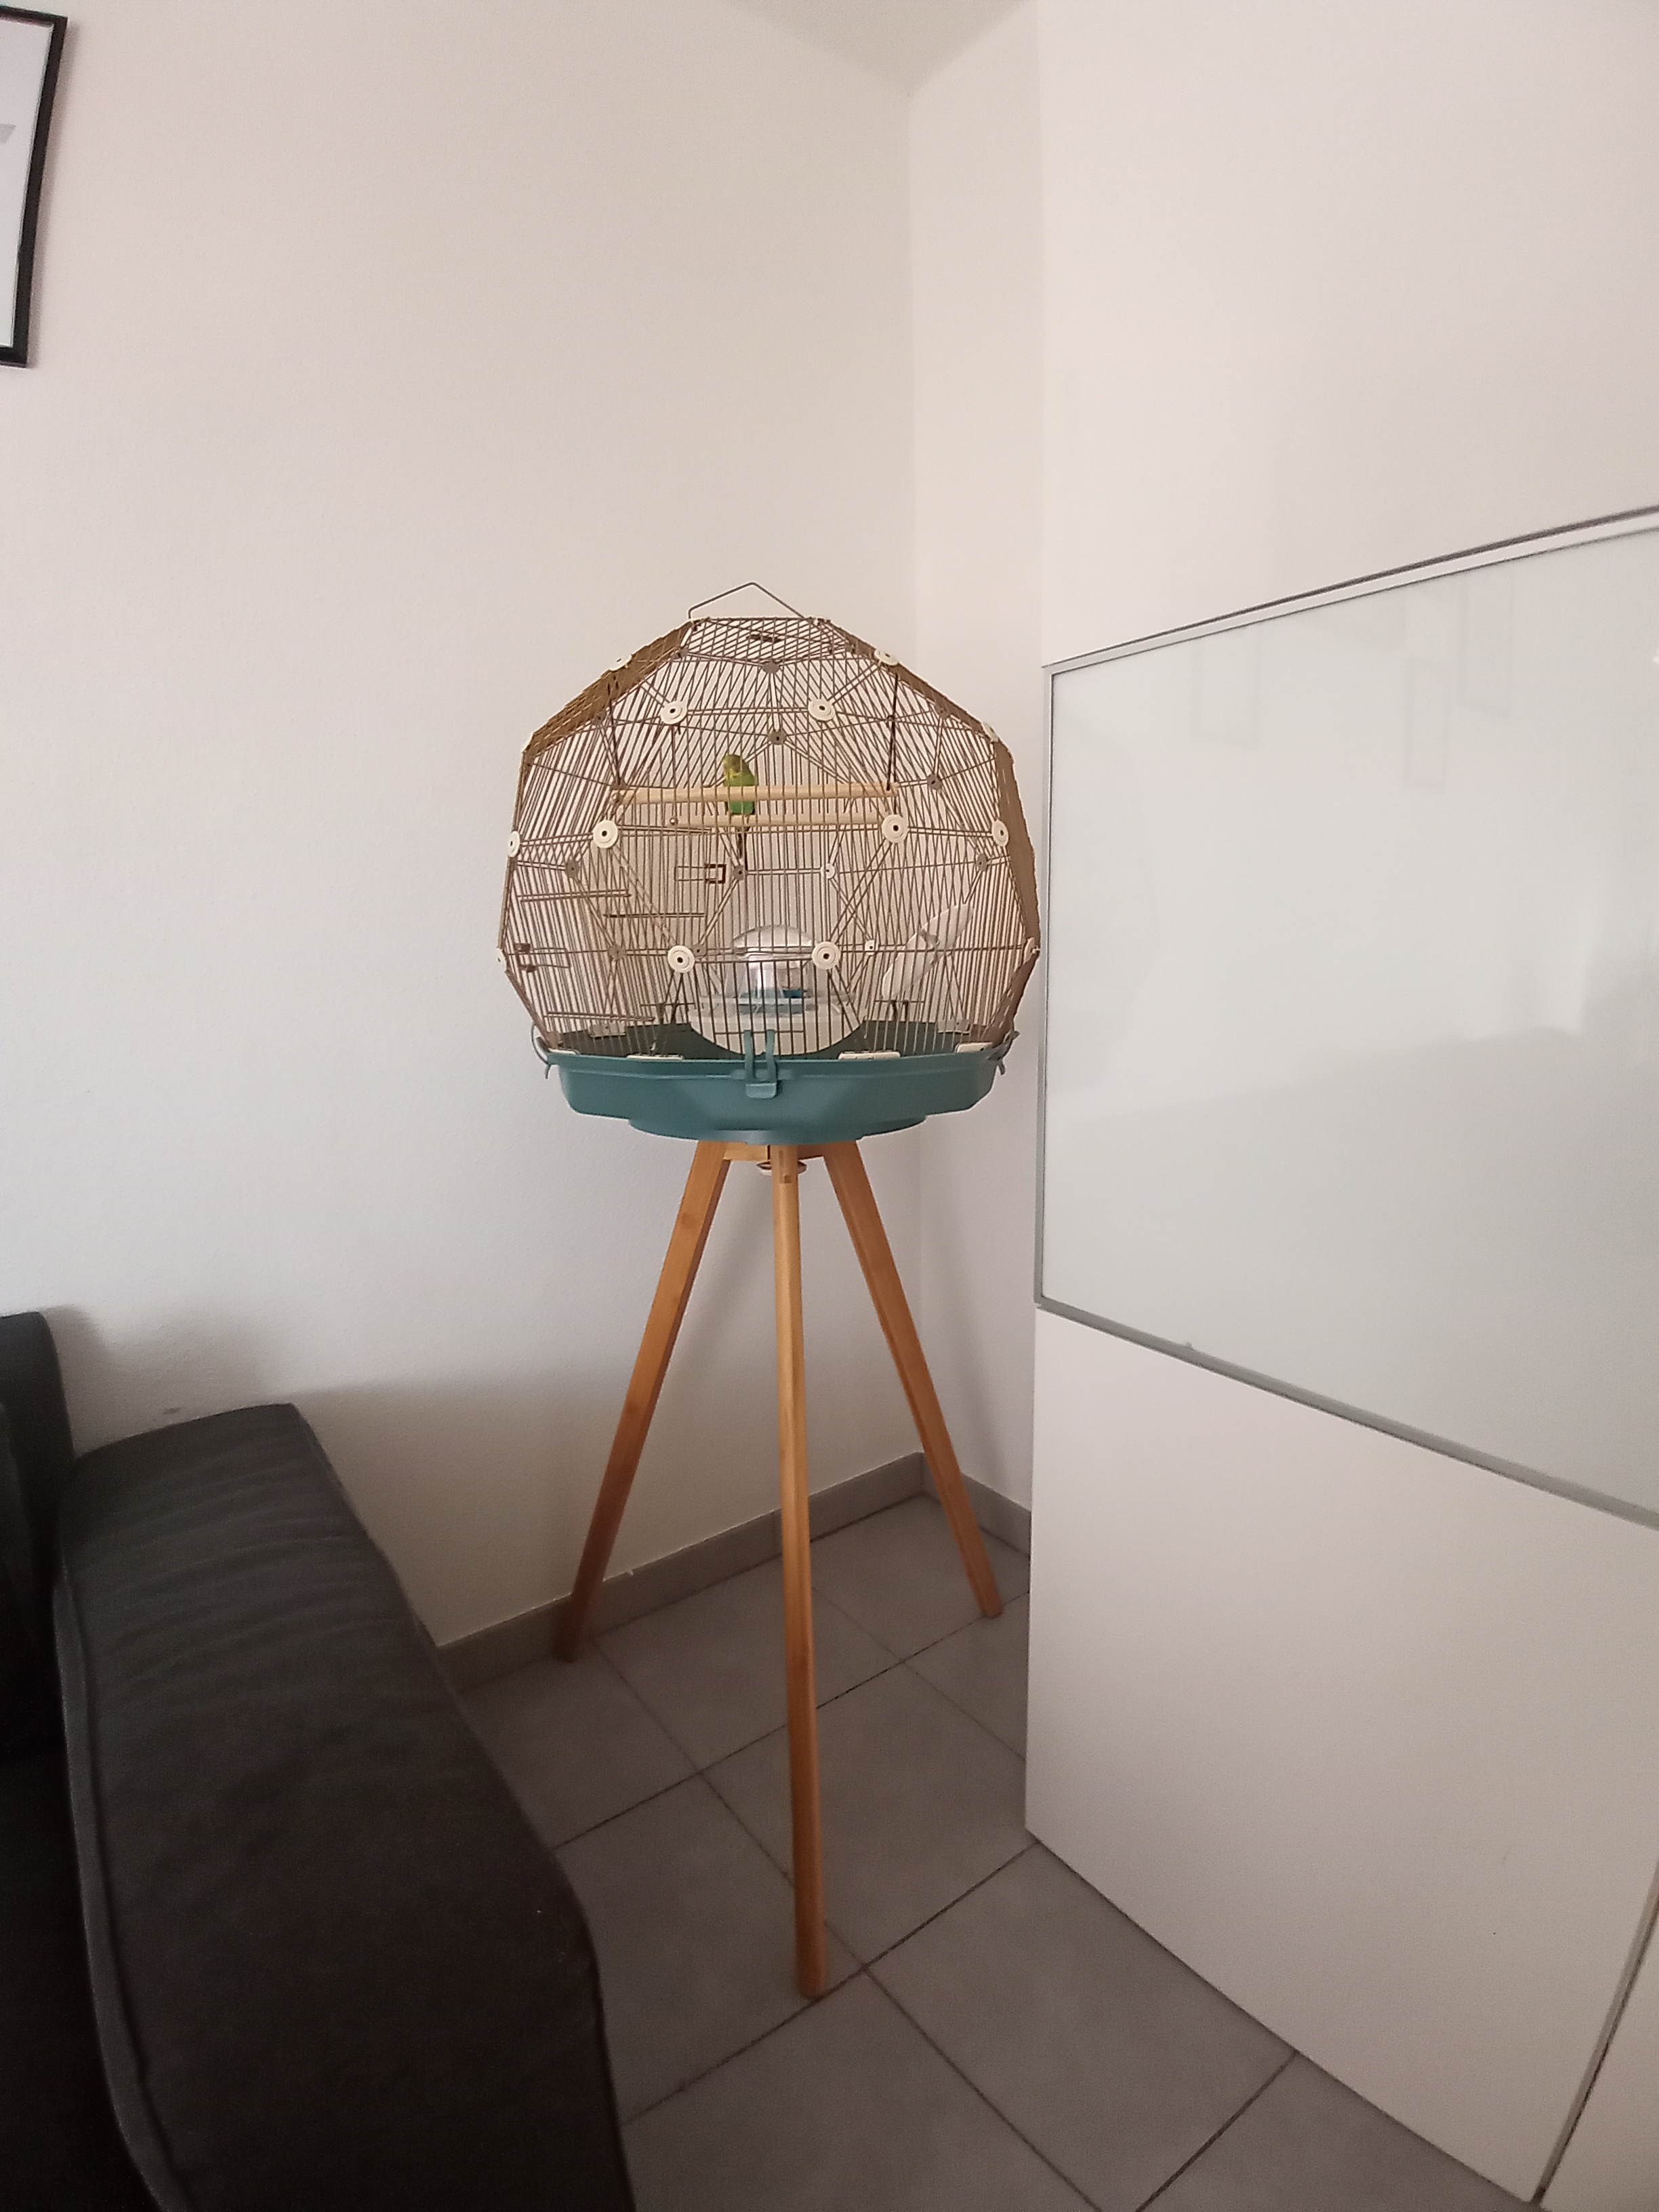 A teal and gold bird cage in the corner of a room